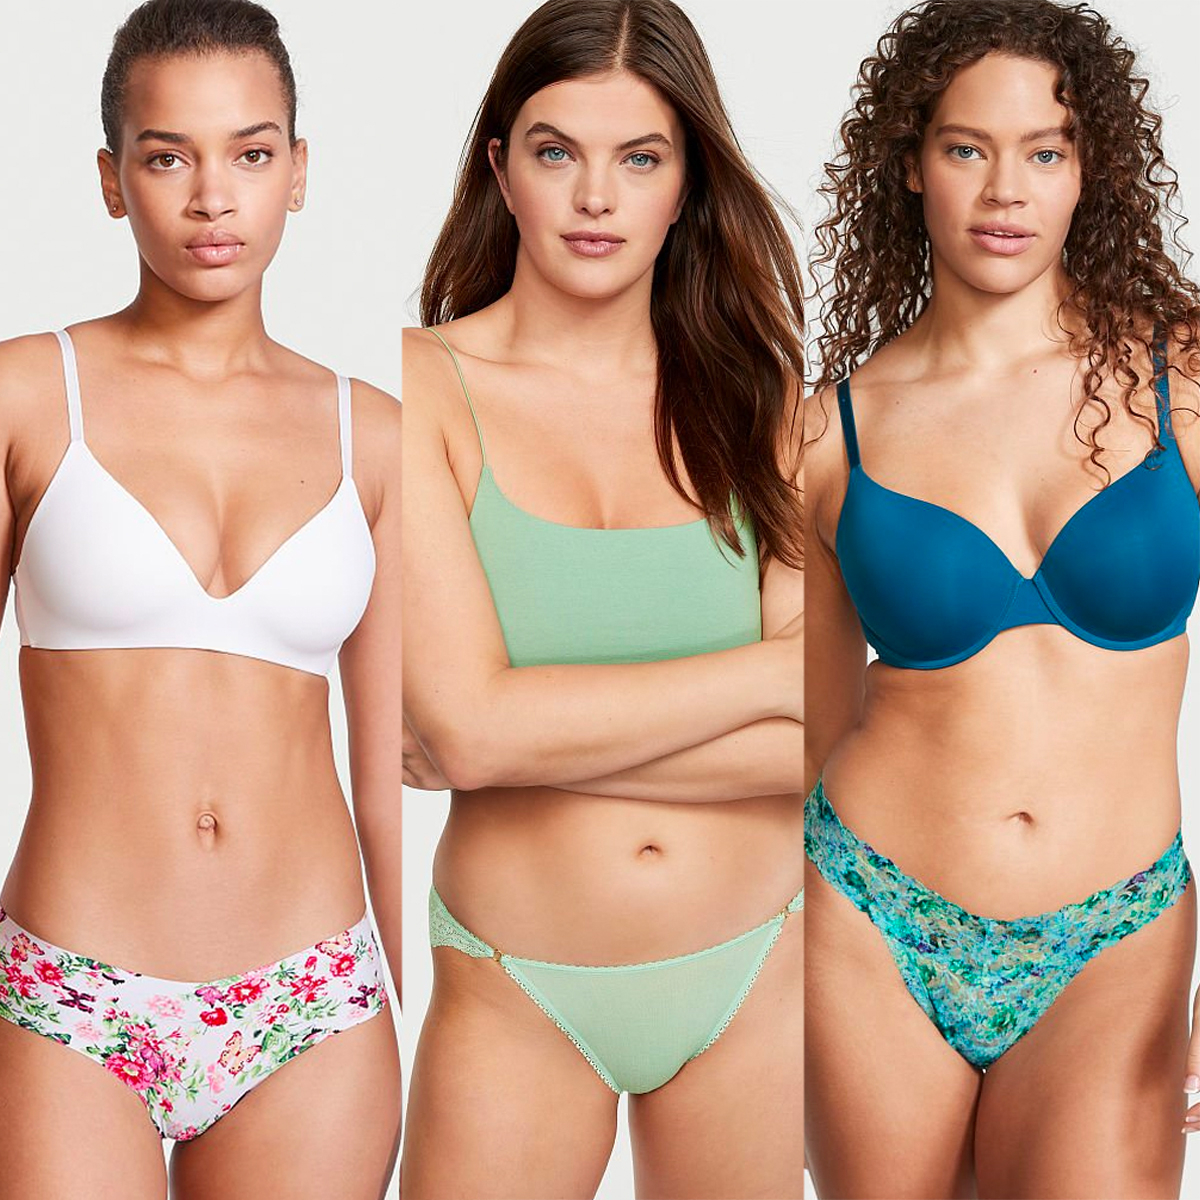 Victoria's Secret: $1 Cotton Panty When You Try on Bra Starting Tomorrow  (No Add'l Purchase Necessary)